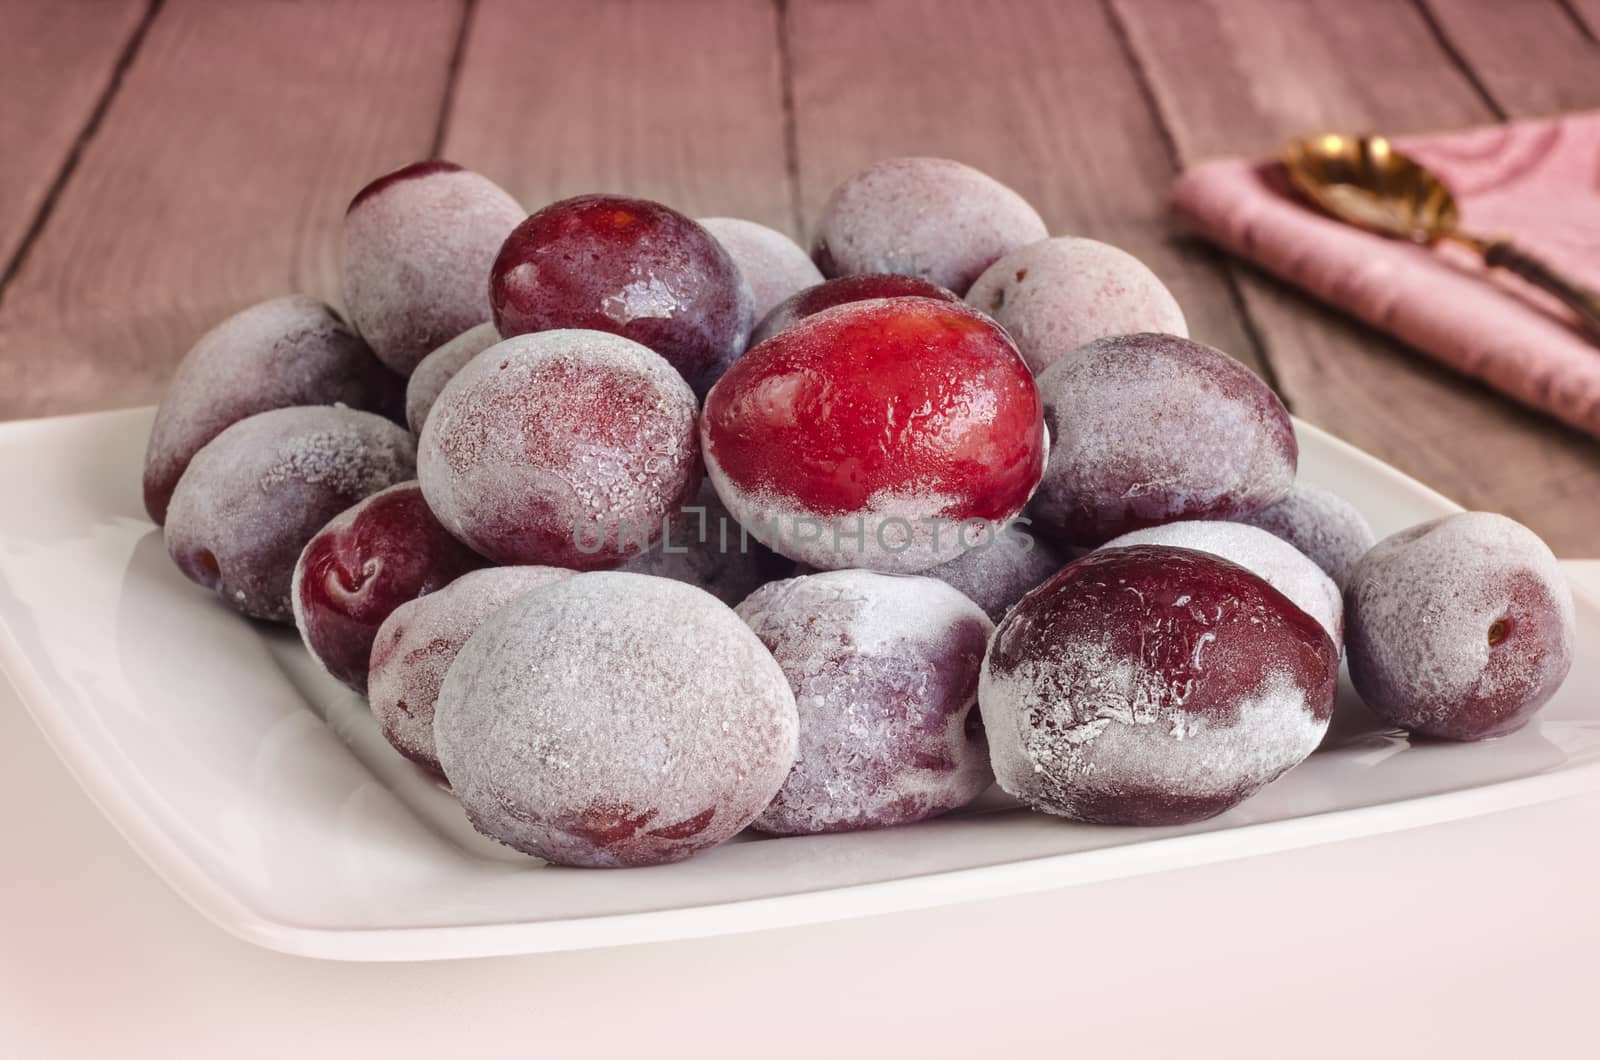 Frozen plum on a plate by Gaina